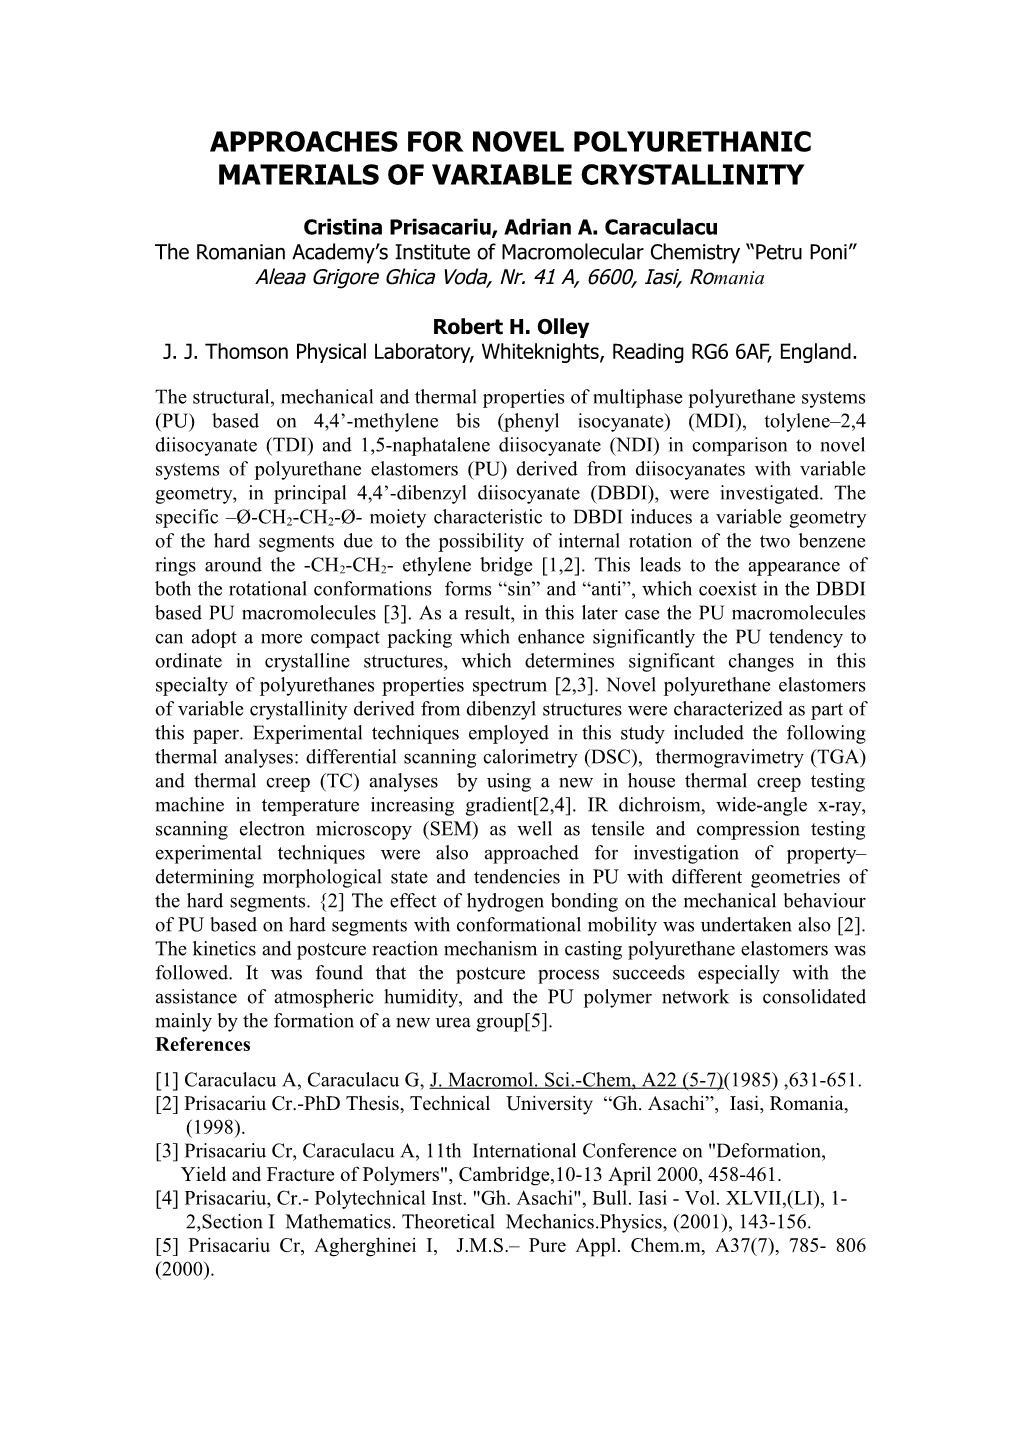 Approaches for Novel Polyurethanic Materials of Variable Crystallinity